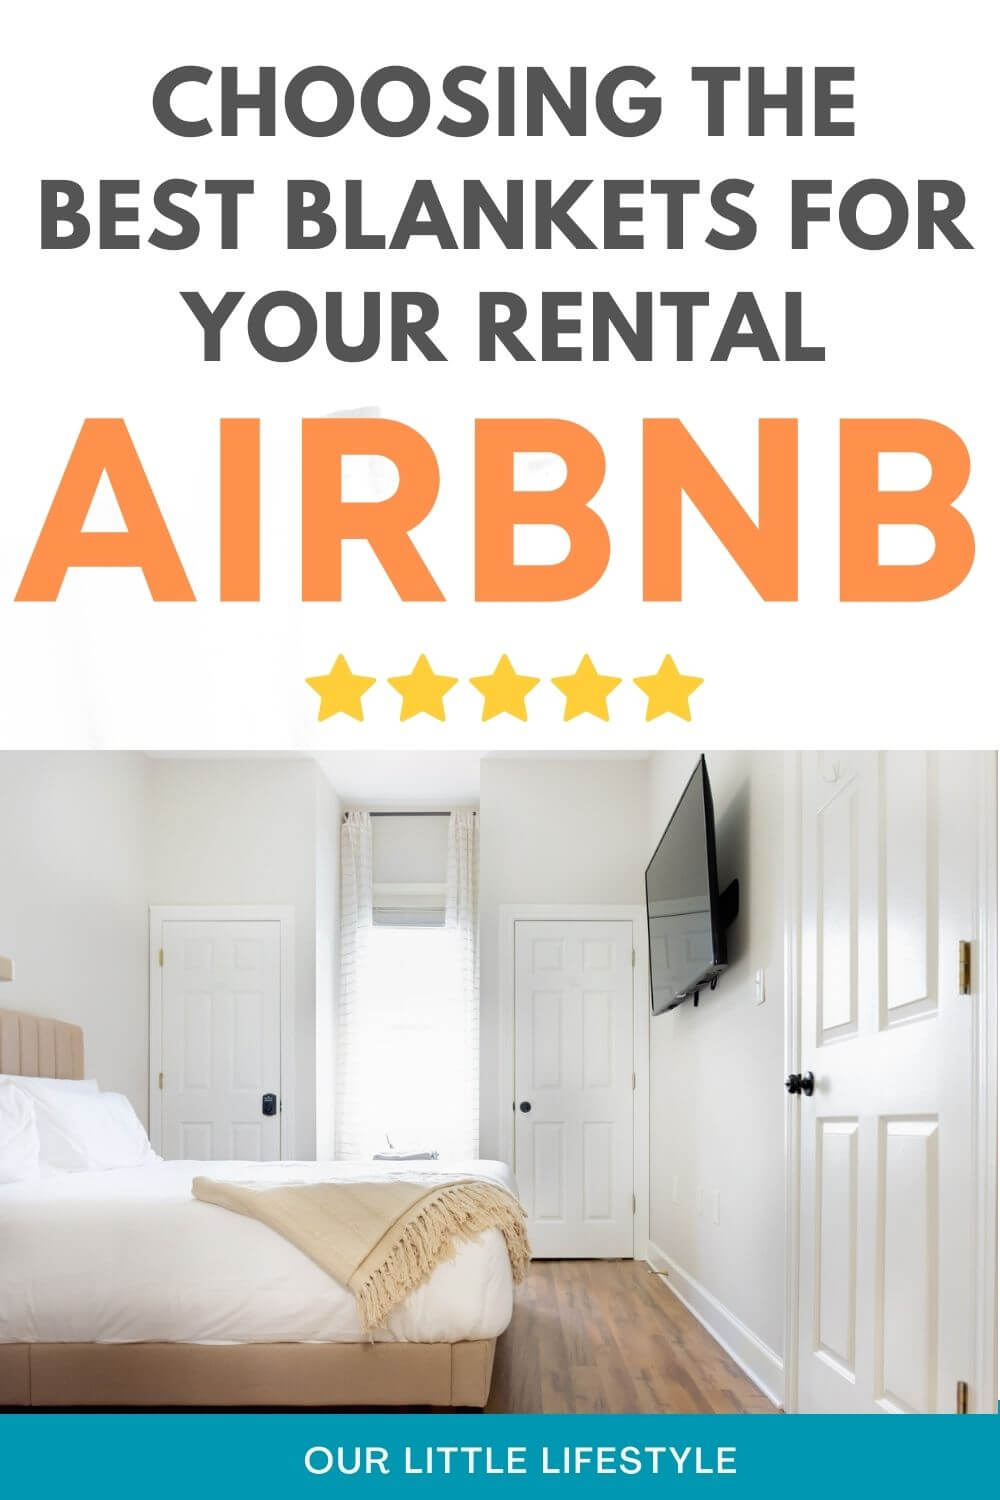 Best Blankets For Airbnb Rental